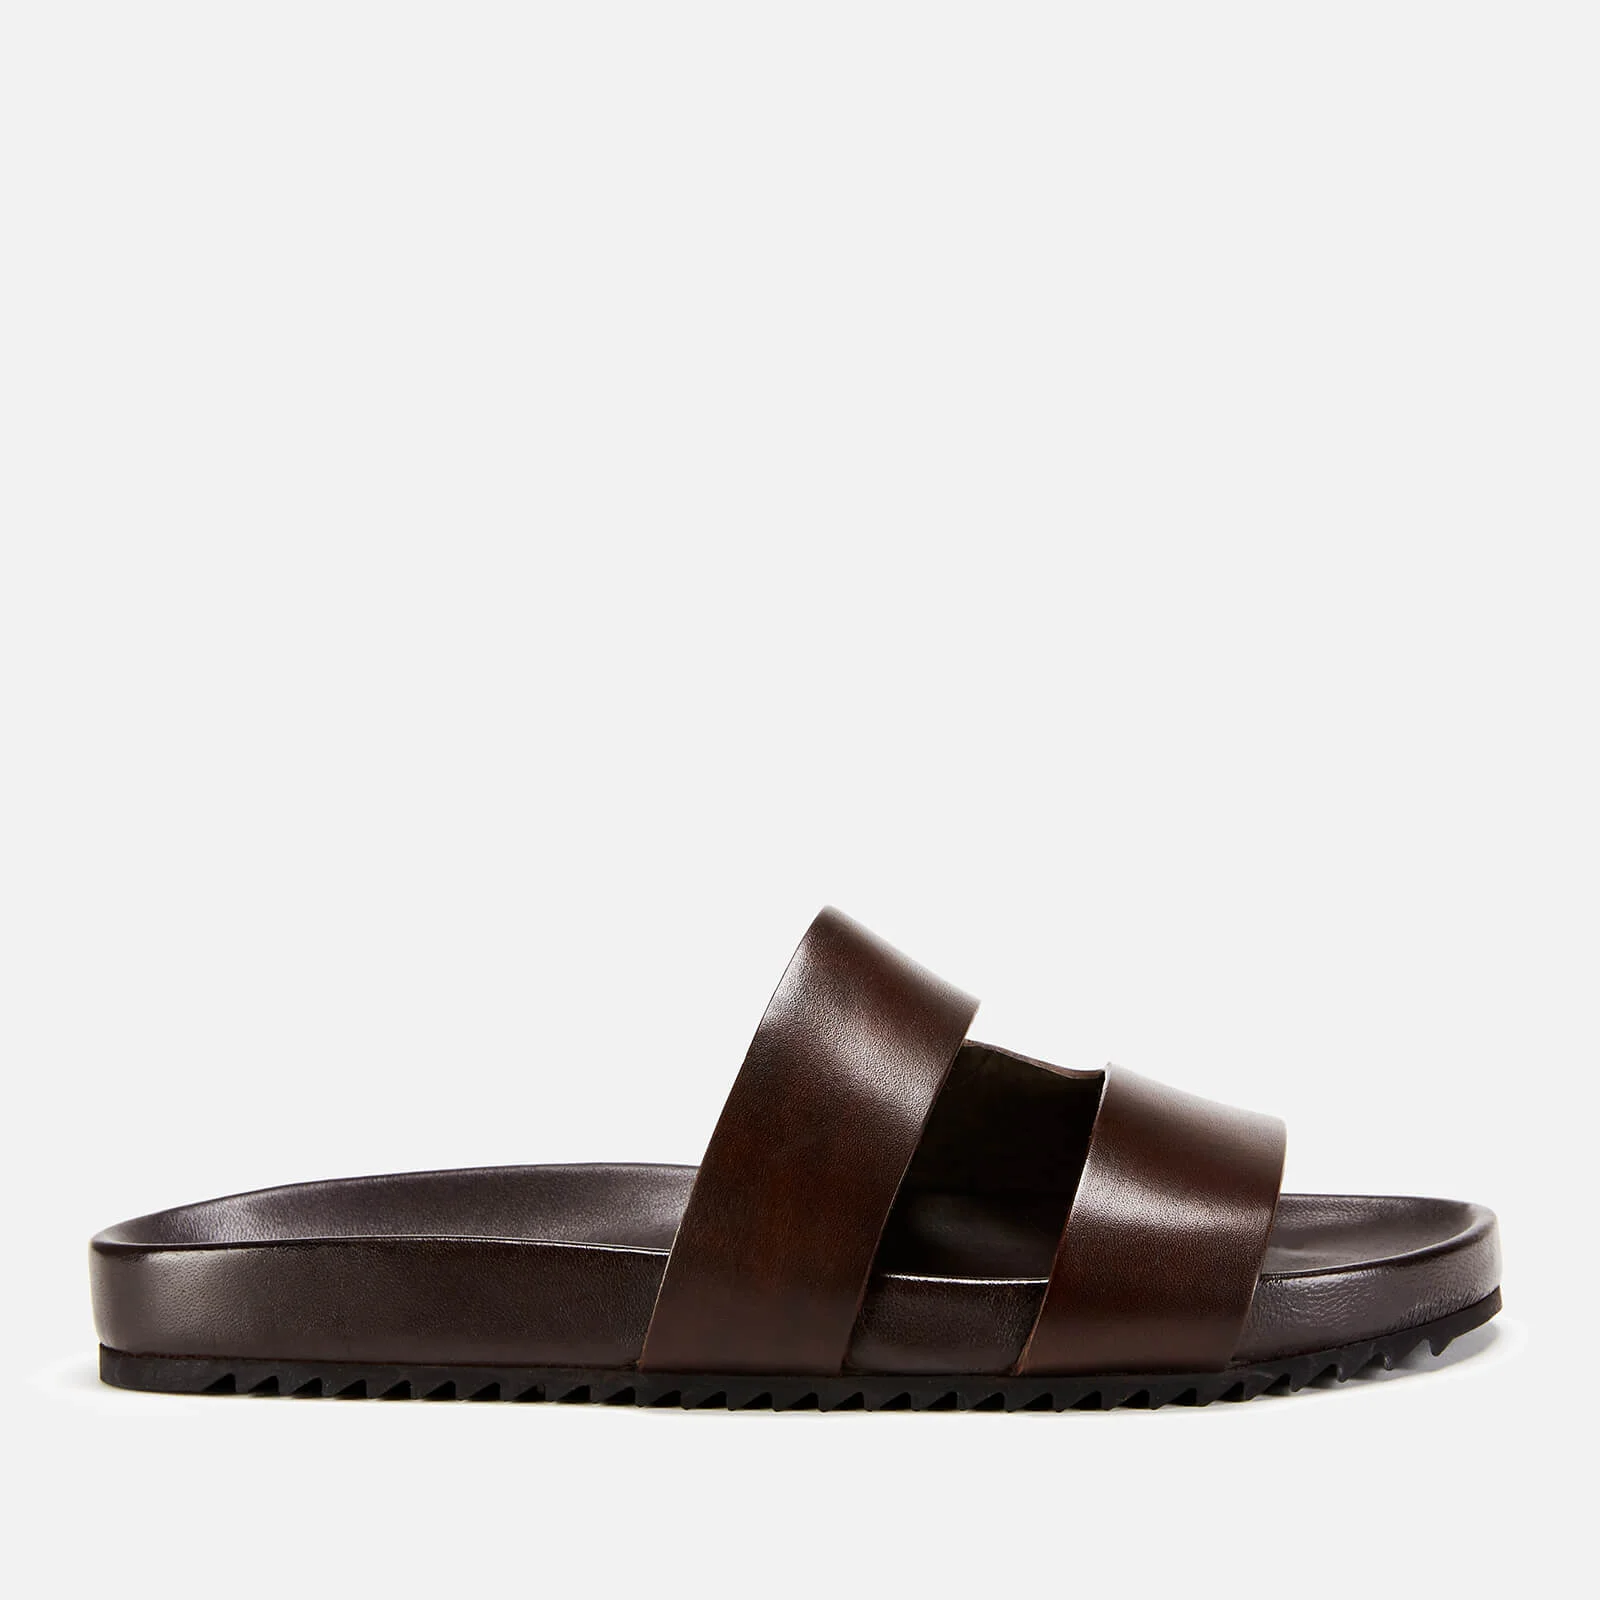 Grenson Men's Chadwick Hand Painted Leather Slide Sandals - Brown Image 1